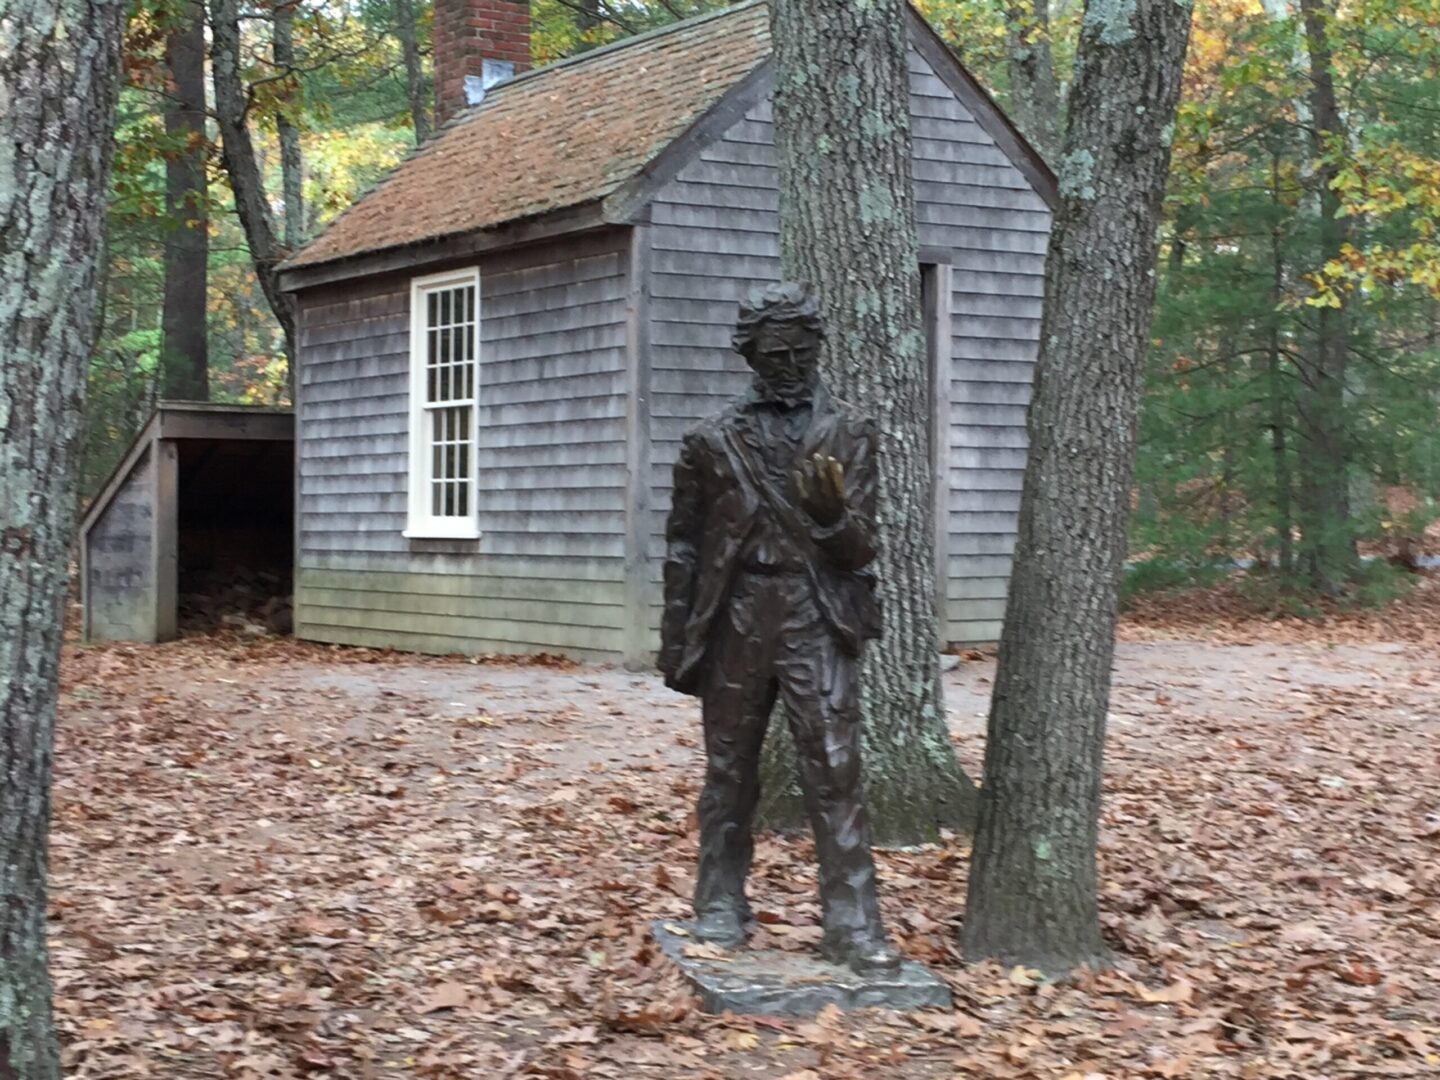 A Walk through Walden Woods in search of Thoreau’s Cabin.